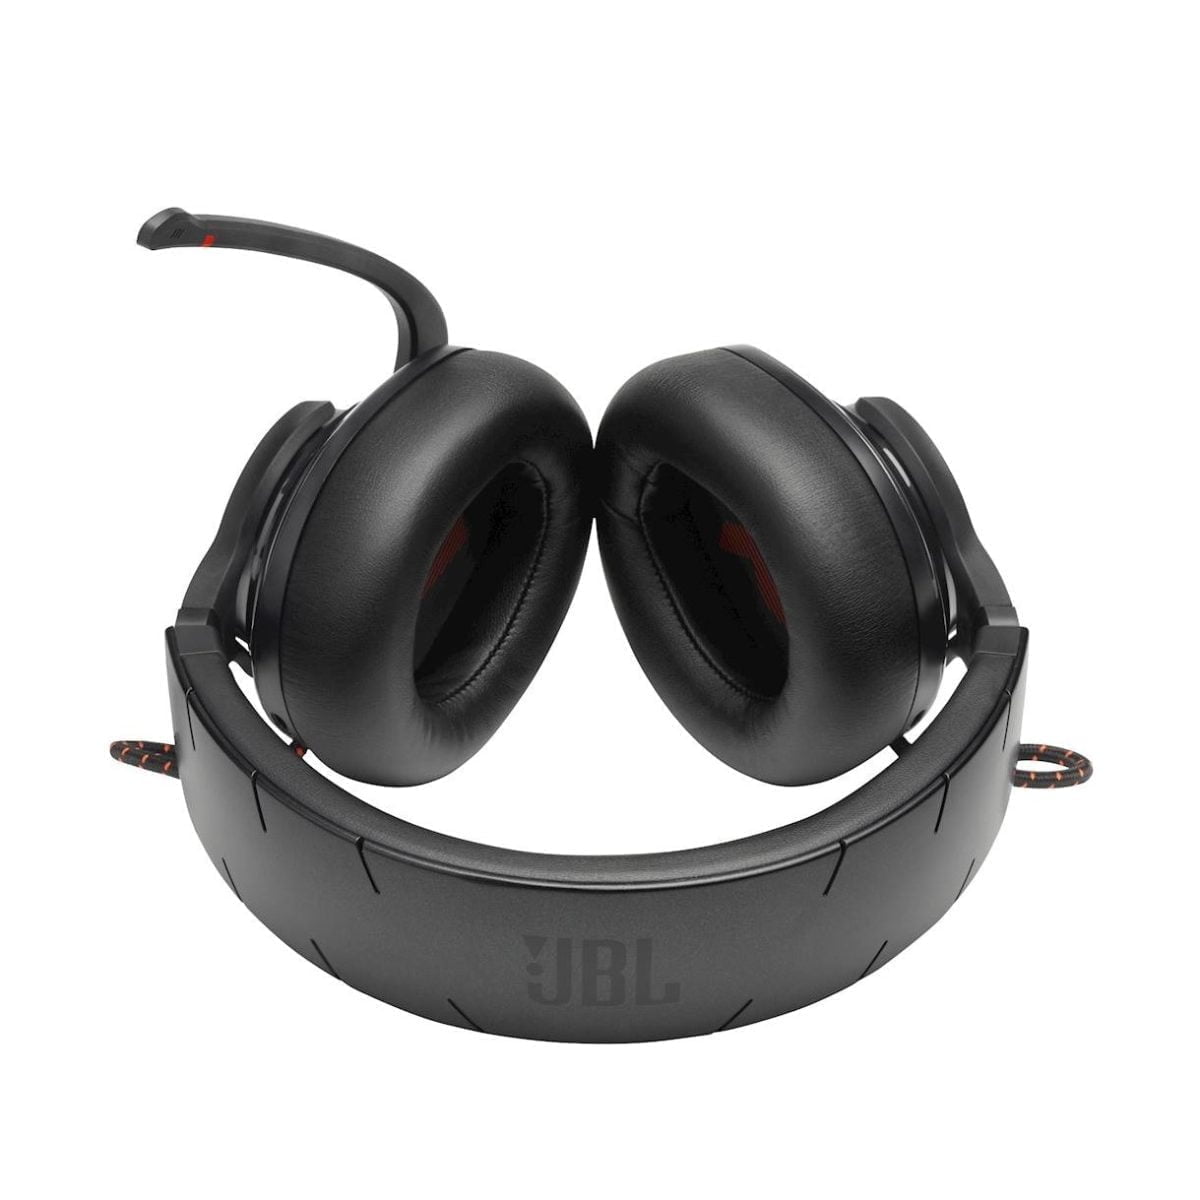 6408577Cv17D Jbl &Lt;H1&Gt;Jbl Quantum 200 Wired Over-Ear Gaming Headset With Flip-Up Mic&Lt;/H1&Gt; Https://Www.youtube.com/Watch?V=E3Fiycdl7De Turn Your Game Into An Epic Event. Featuring Jbl Quantumsound Signature, The Jbl Quantum 200 Headset Puts You Right In The Middle Of The Action. Immersive And Accurate, So That You Can Hear Even The Tiniest Details, The Jbl Quantum 200 Equips You With All You Need To Own Every Battle. Jbl Quantum Jbl Quantum 200 Wired Over-Ear Gaming Headset With Flip-Up Mic